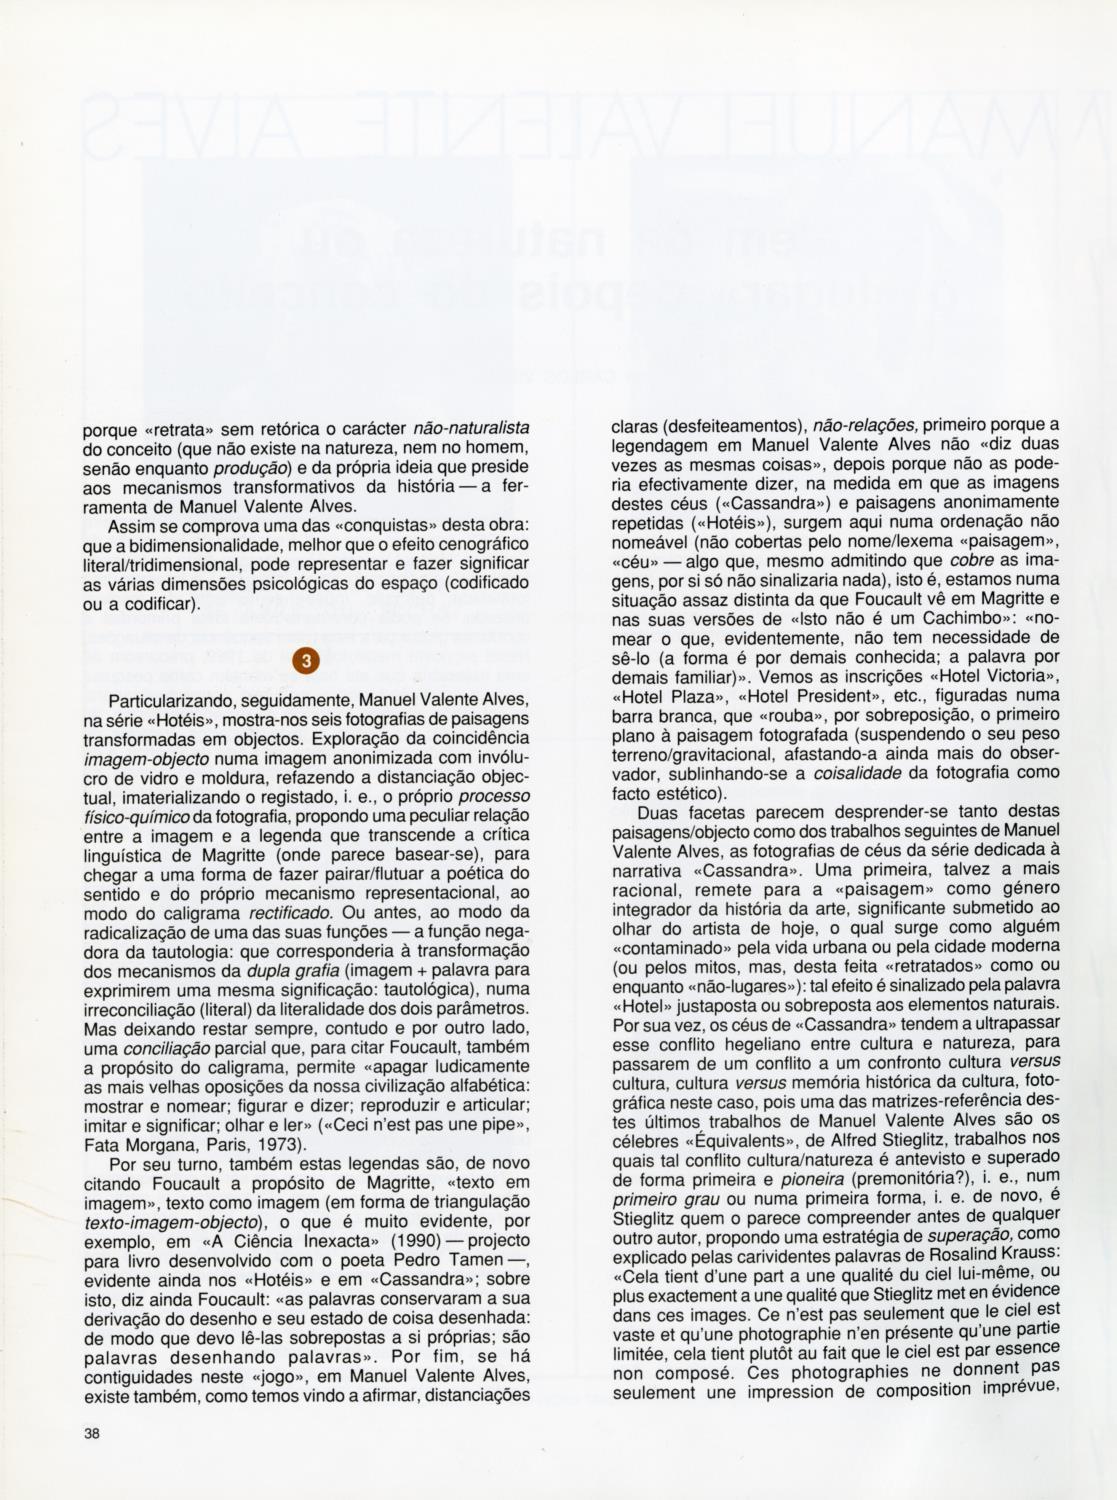 PACL_30a_99_1993_p.38